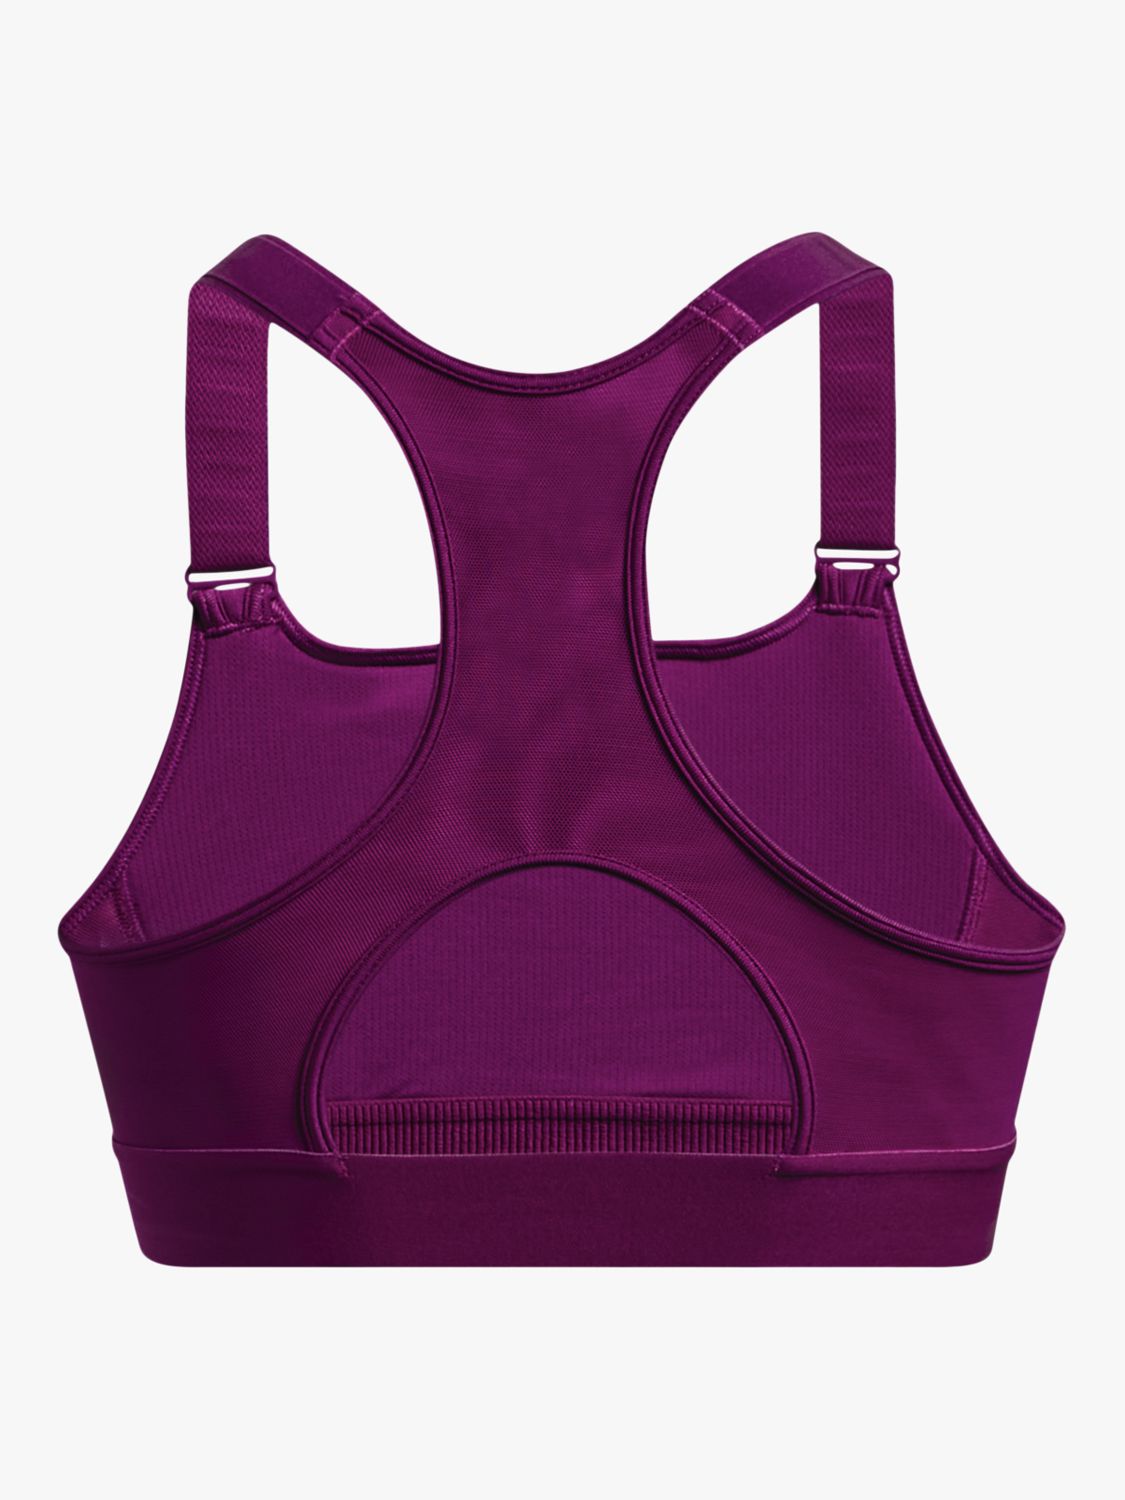 Under Armour Infinity 2.0 High Support Sports Bra, Black, £44.00